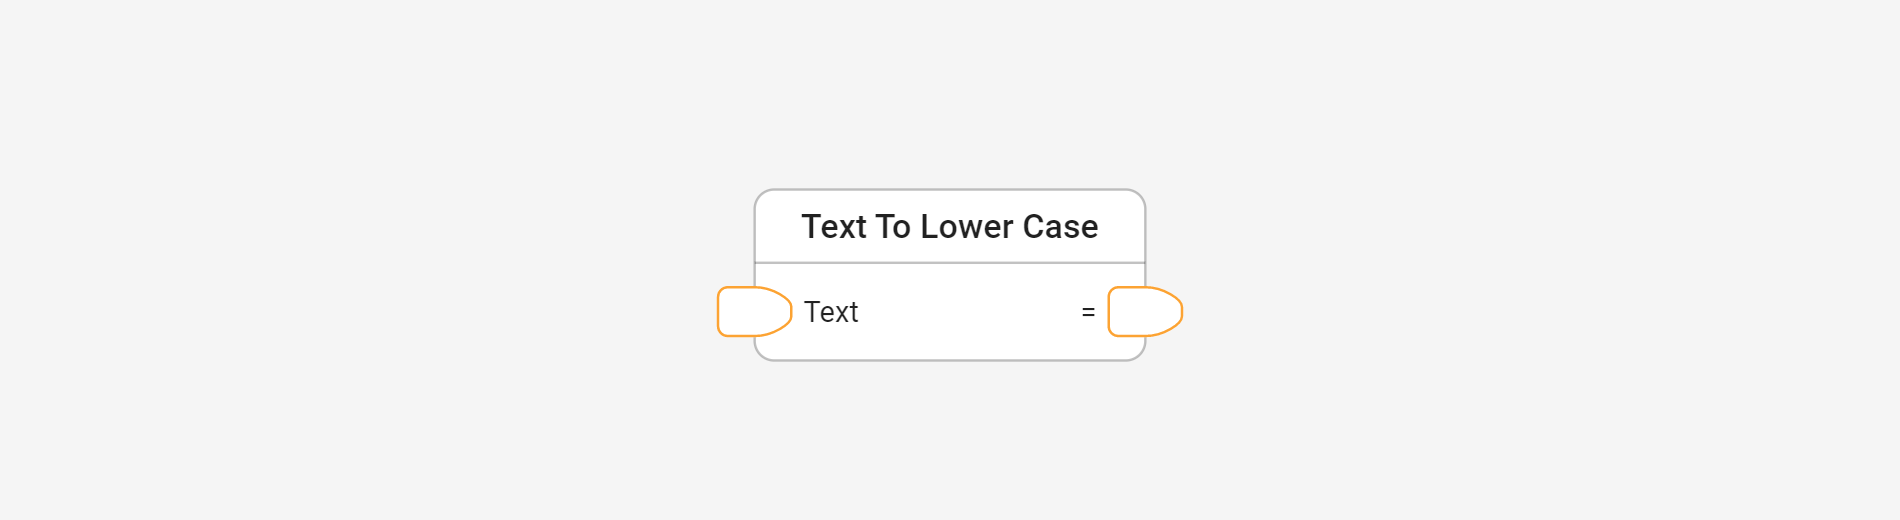 Convert a text to lowercase in Centrldesk